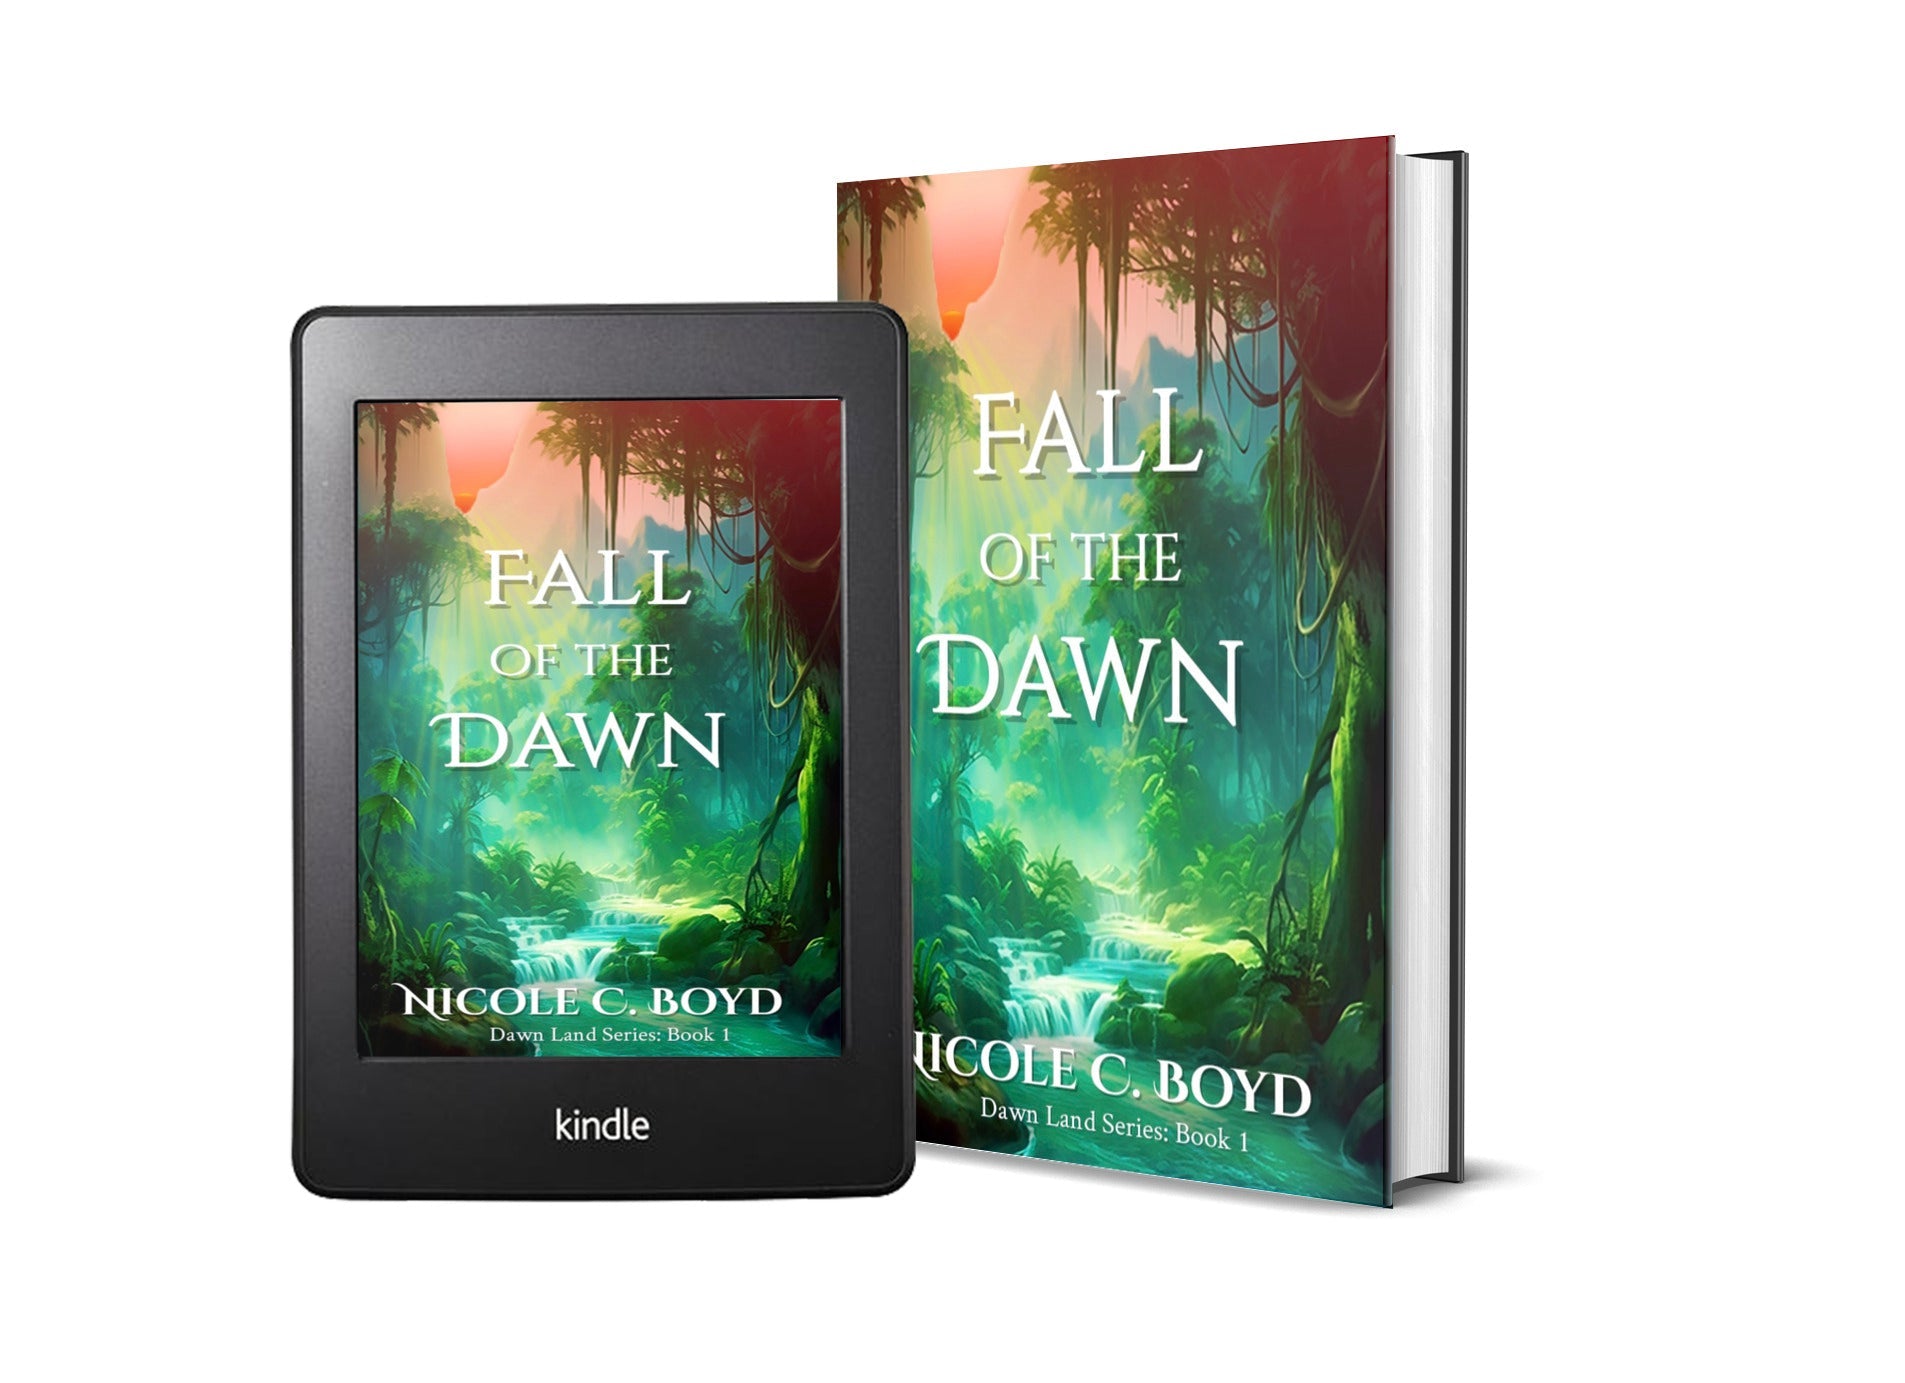 Fall of the Dawn - Hardcover